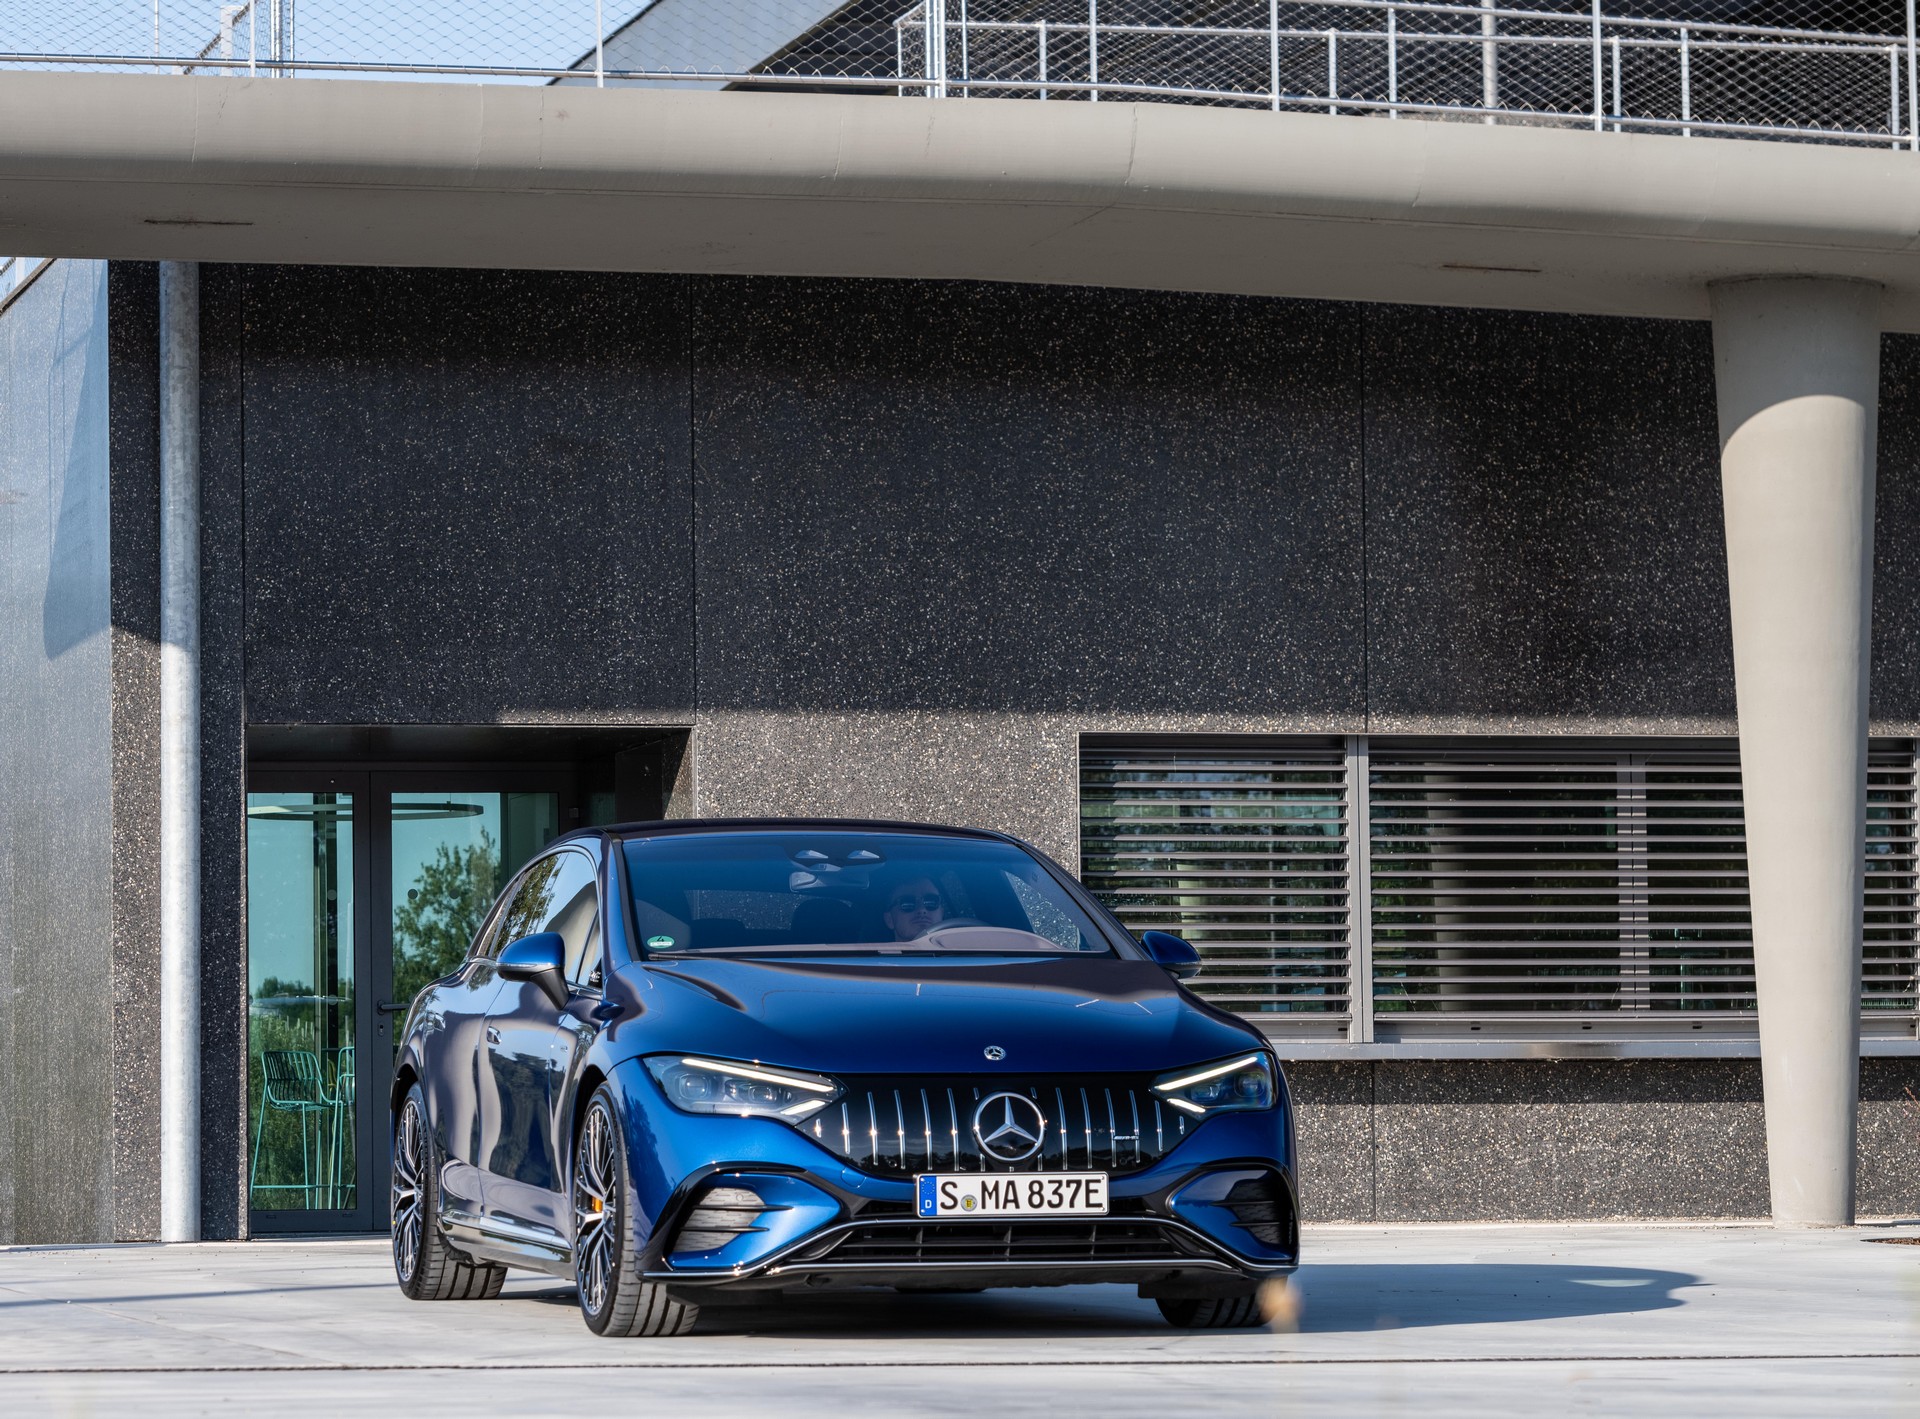 2023 Mercedes-AMG EQE 53 4MATIC+ (Color: Spectral Blue) Front Wallpapers  #124 of 241